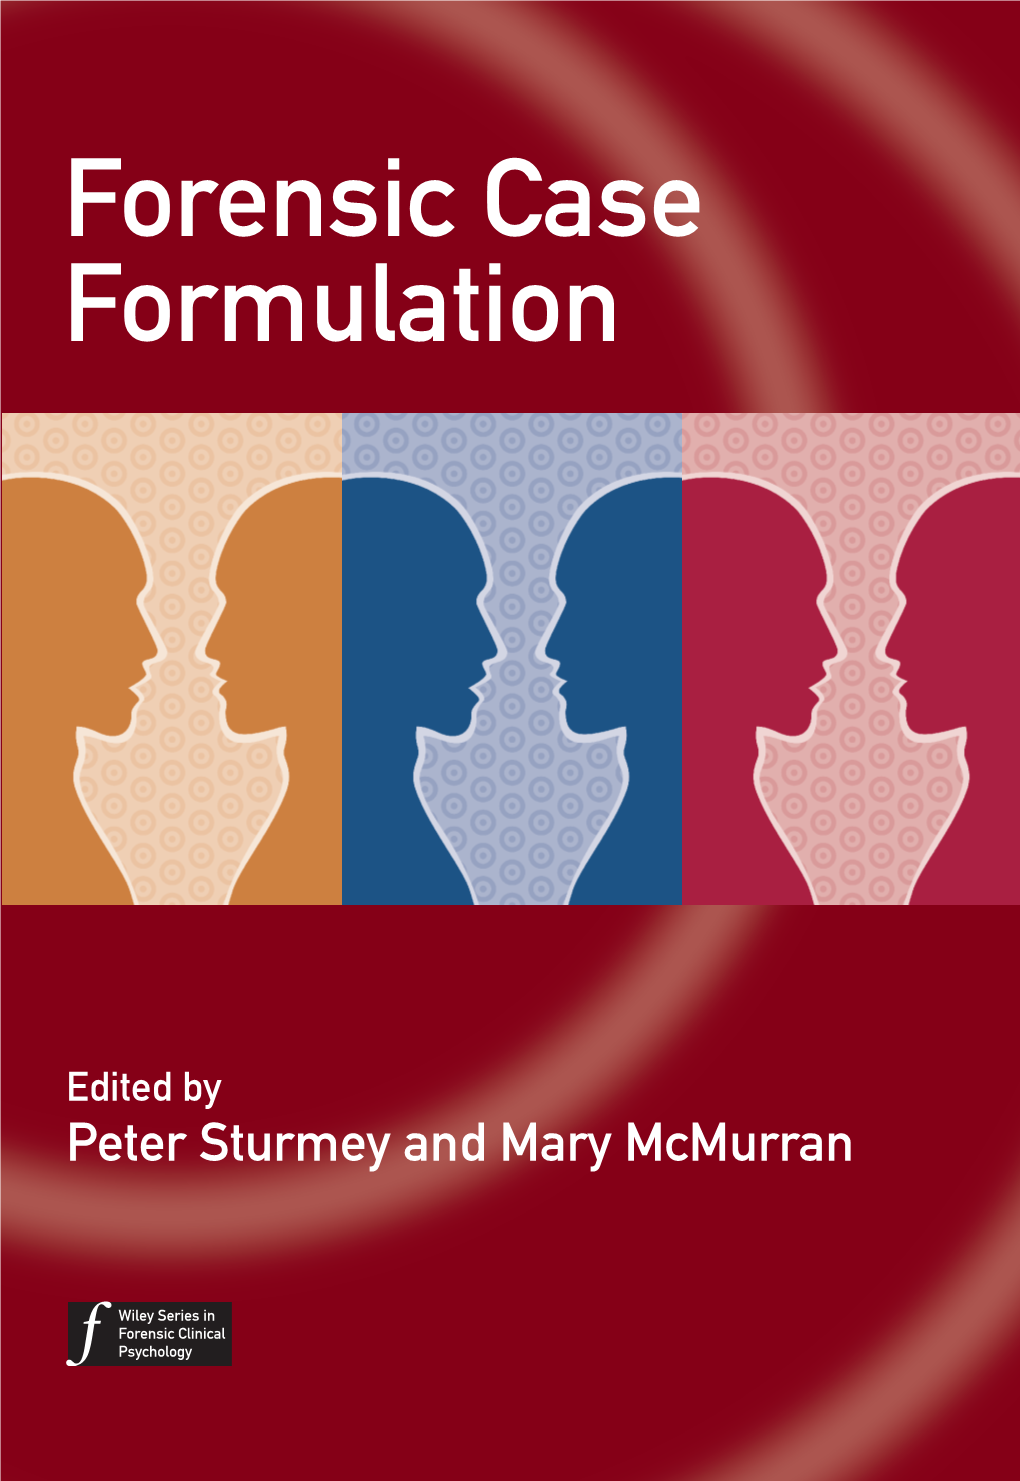 Forensic Case Formulation for This Wiley-Blackwell Series